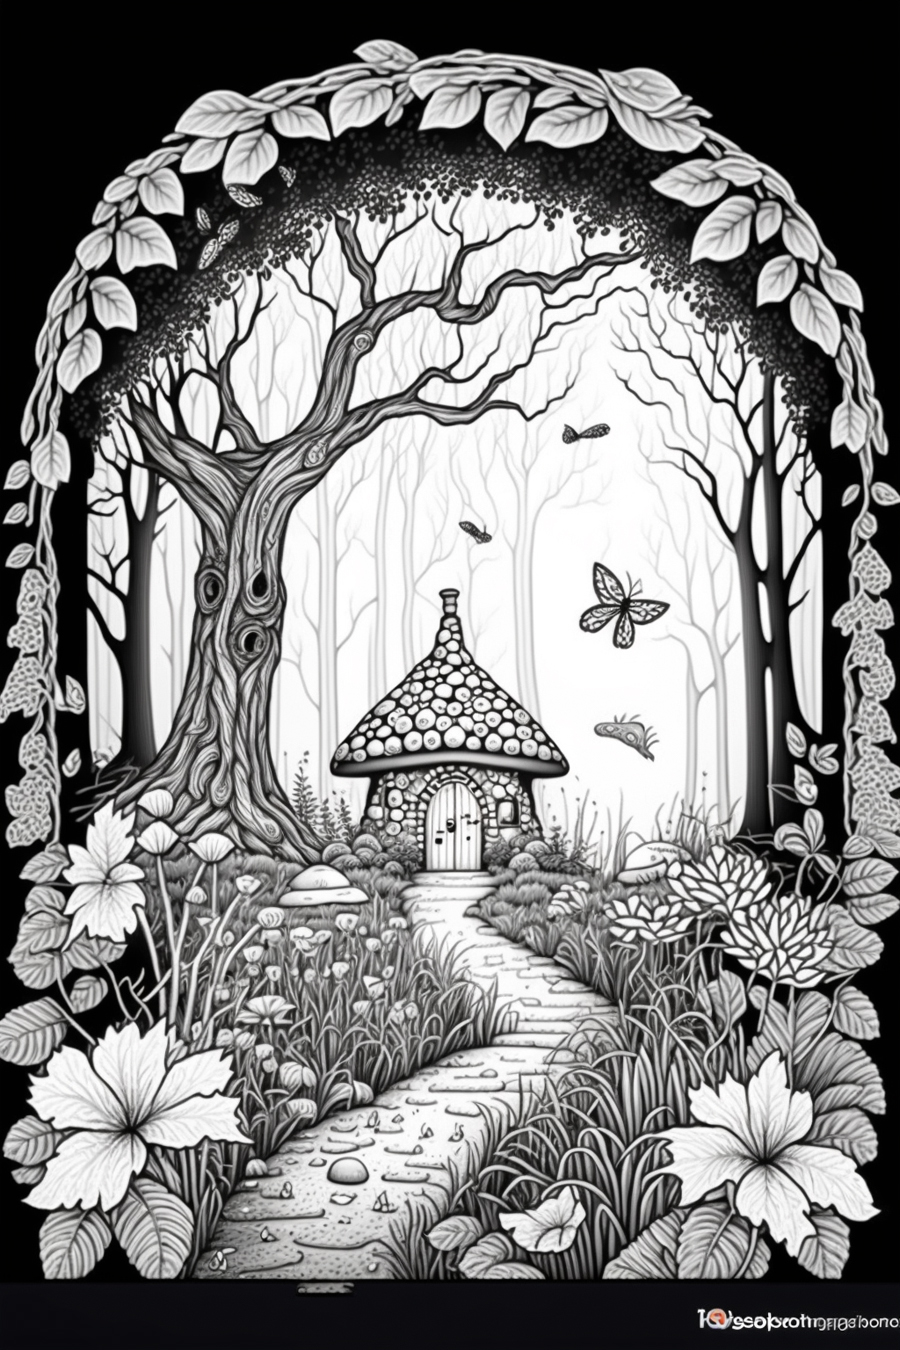 A black and white drawing of a fairy house.